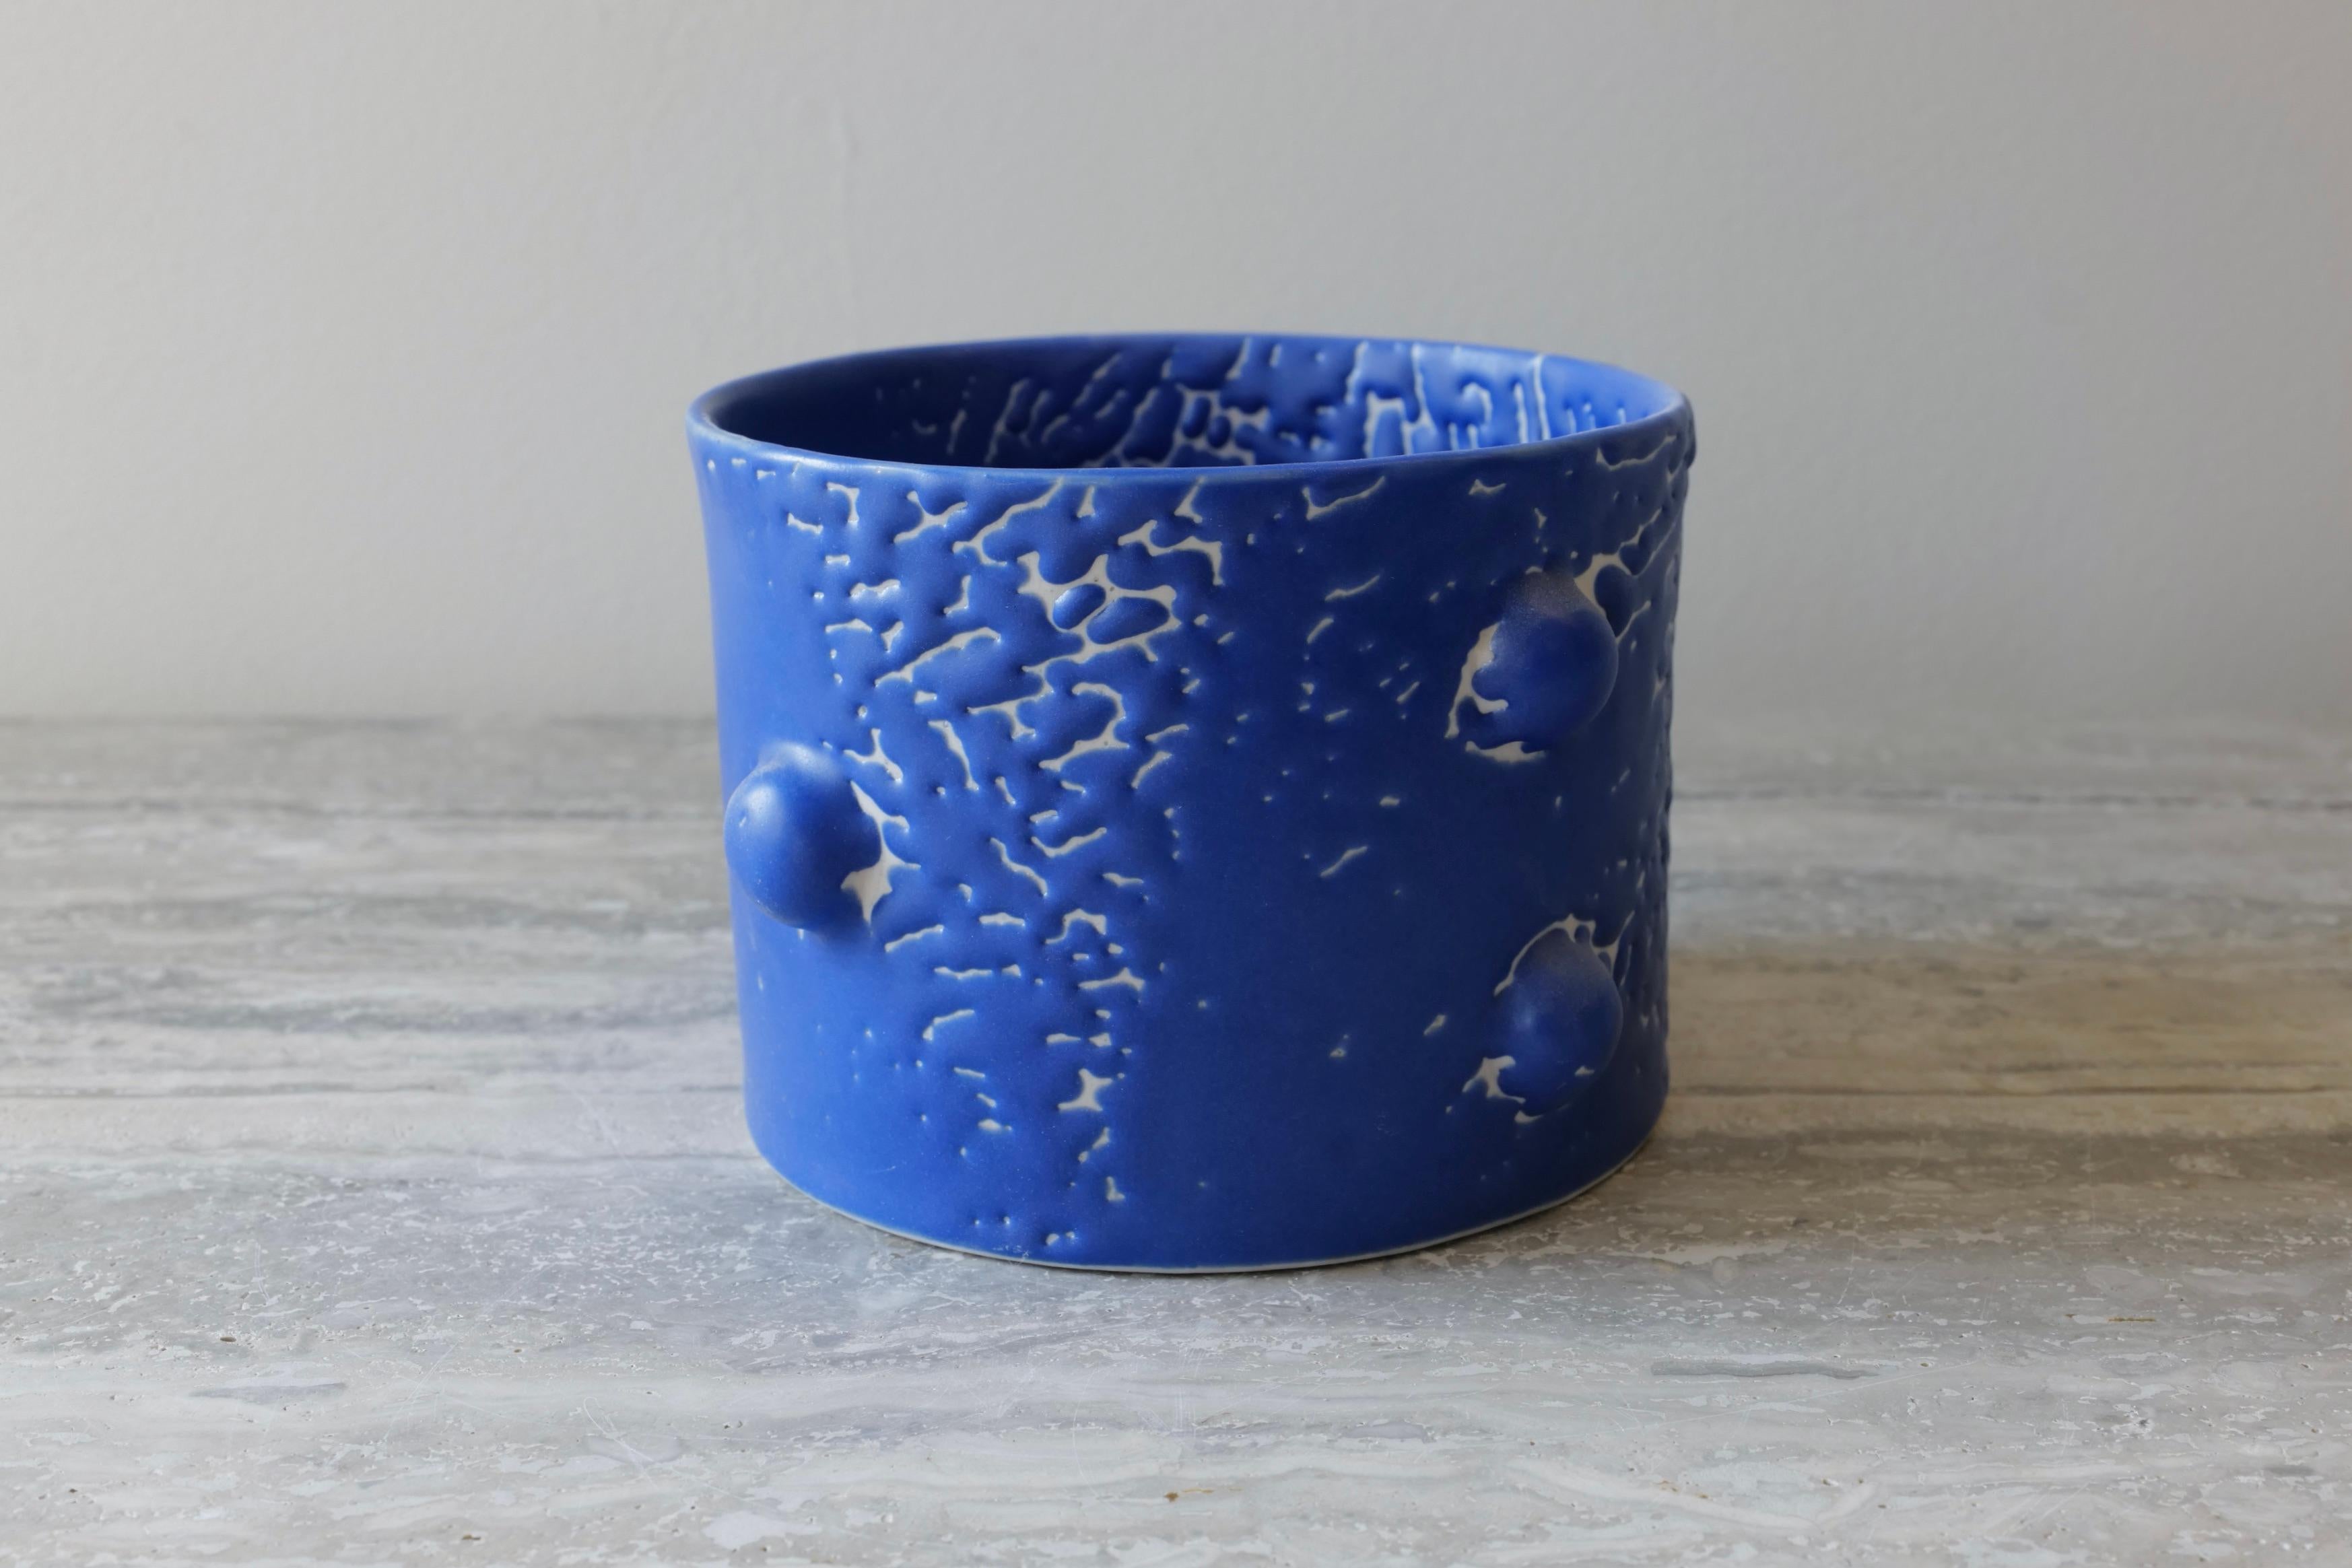 This short, elegant vase is hand-cast in porcelain and glazed with a rich microcrystalline cobalt glaze that has a beautiful crawl texture across the vessel. The ‘bumps’ motif recalls some classical embellishment with some loose evocation of the